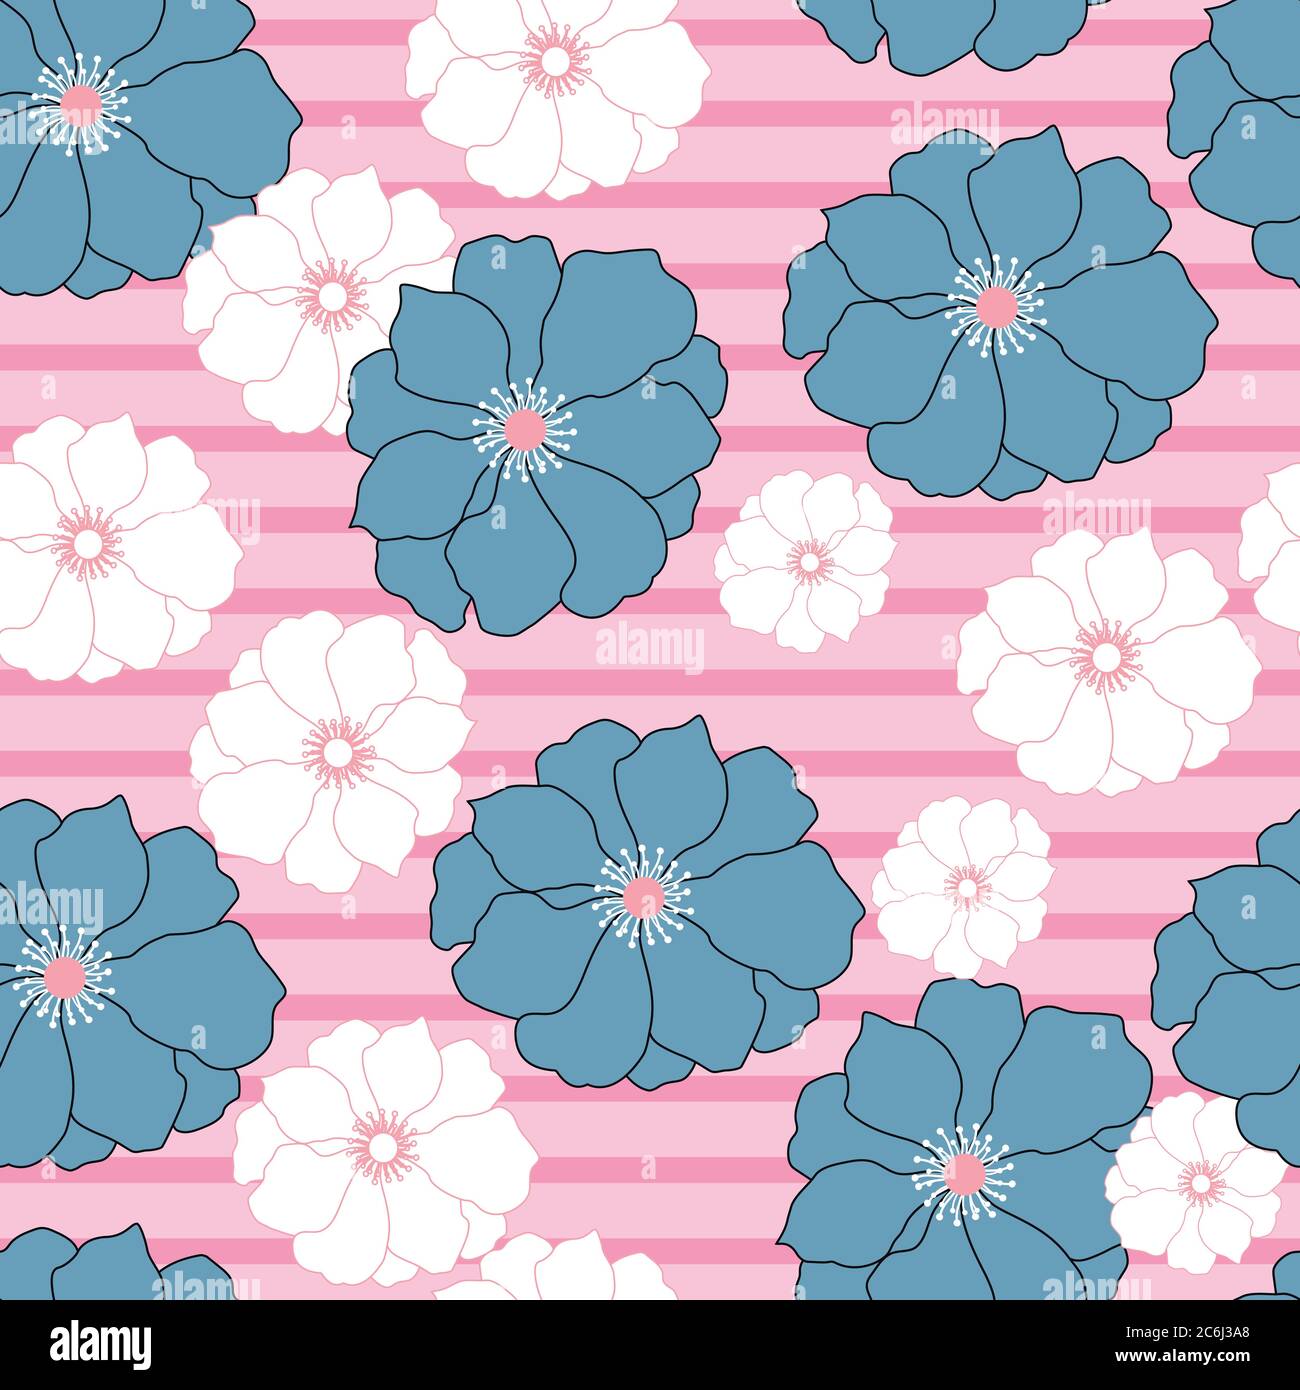 Floral vector seamless pattern design for wallpapers, textiles, wrapping papers, home decor, fashion, tiles, surface etc. Stock Vector